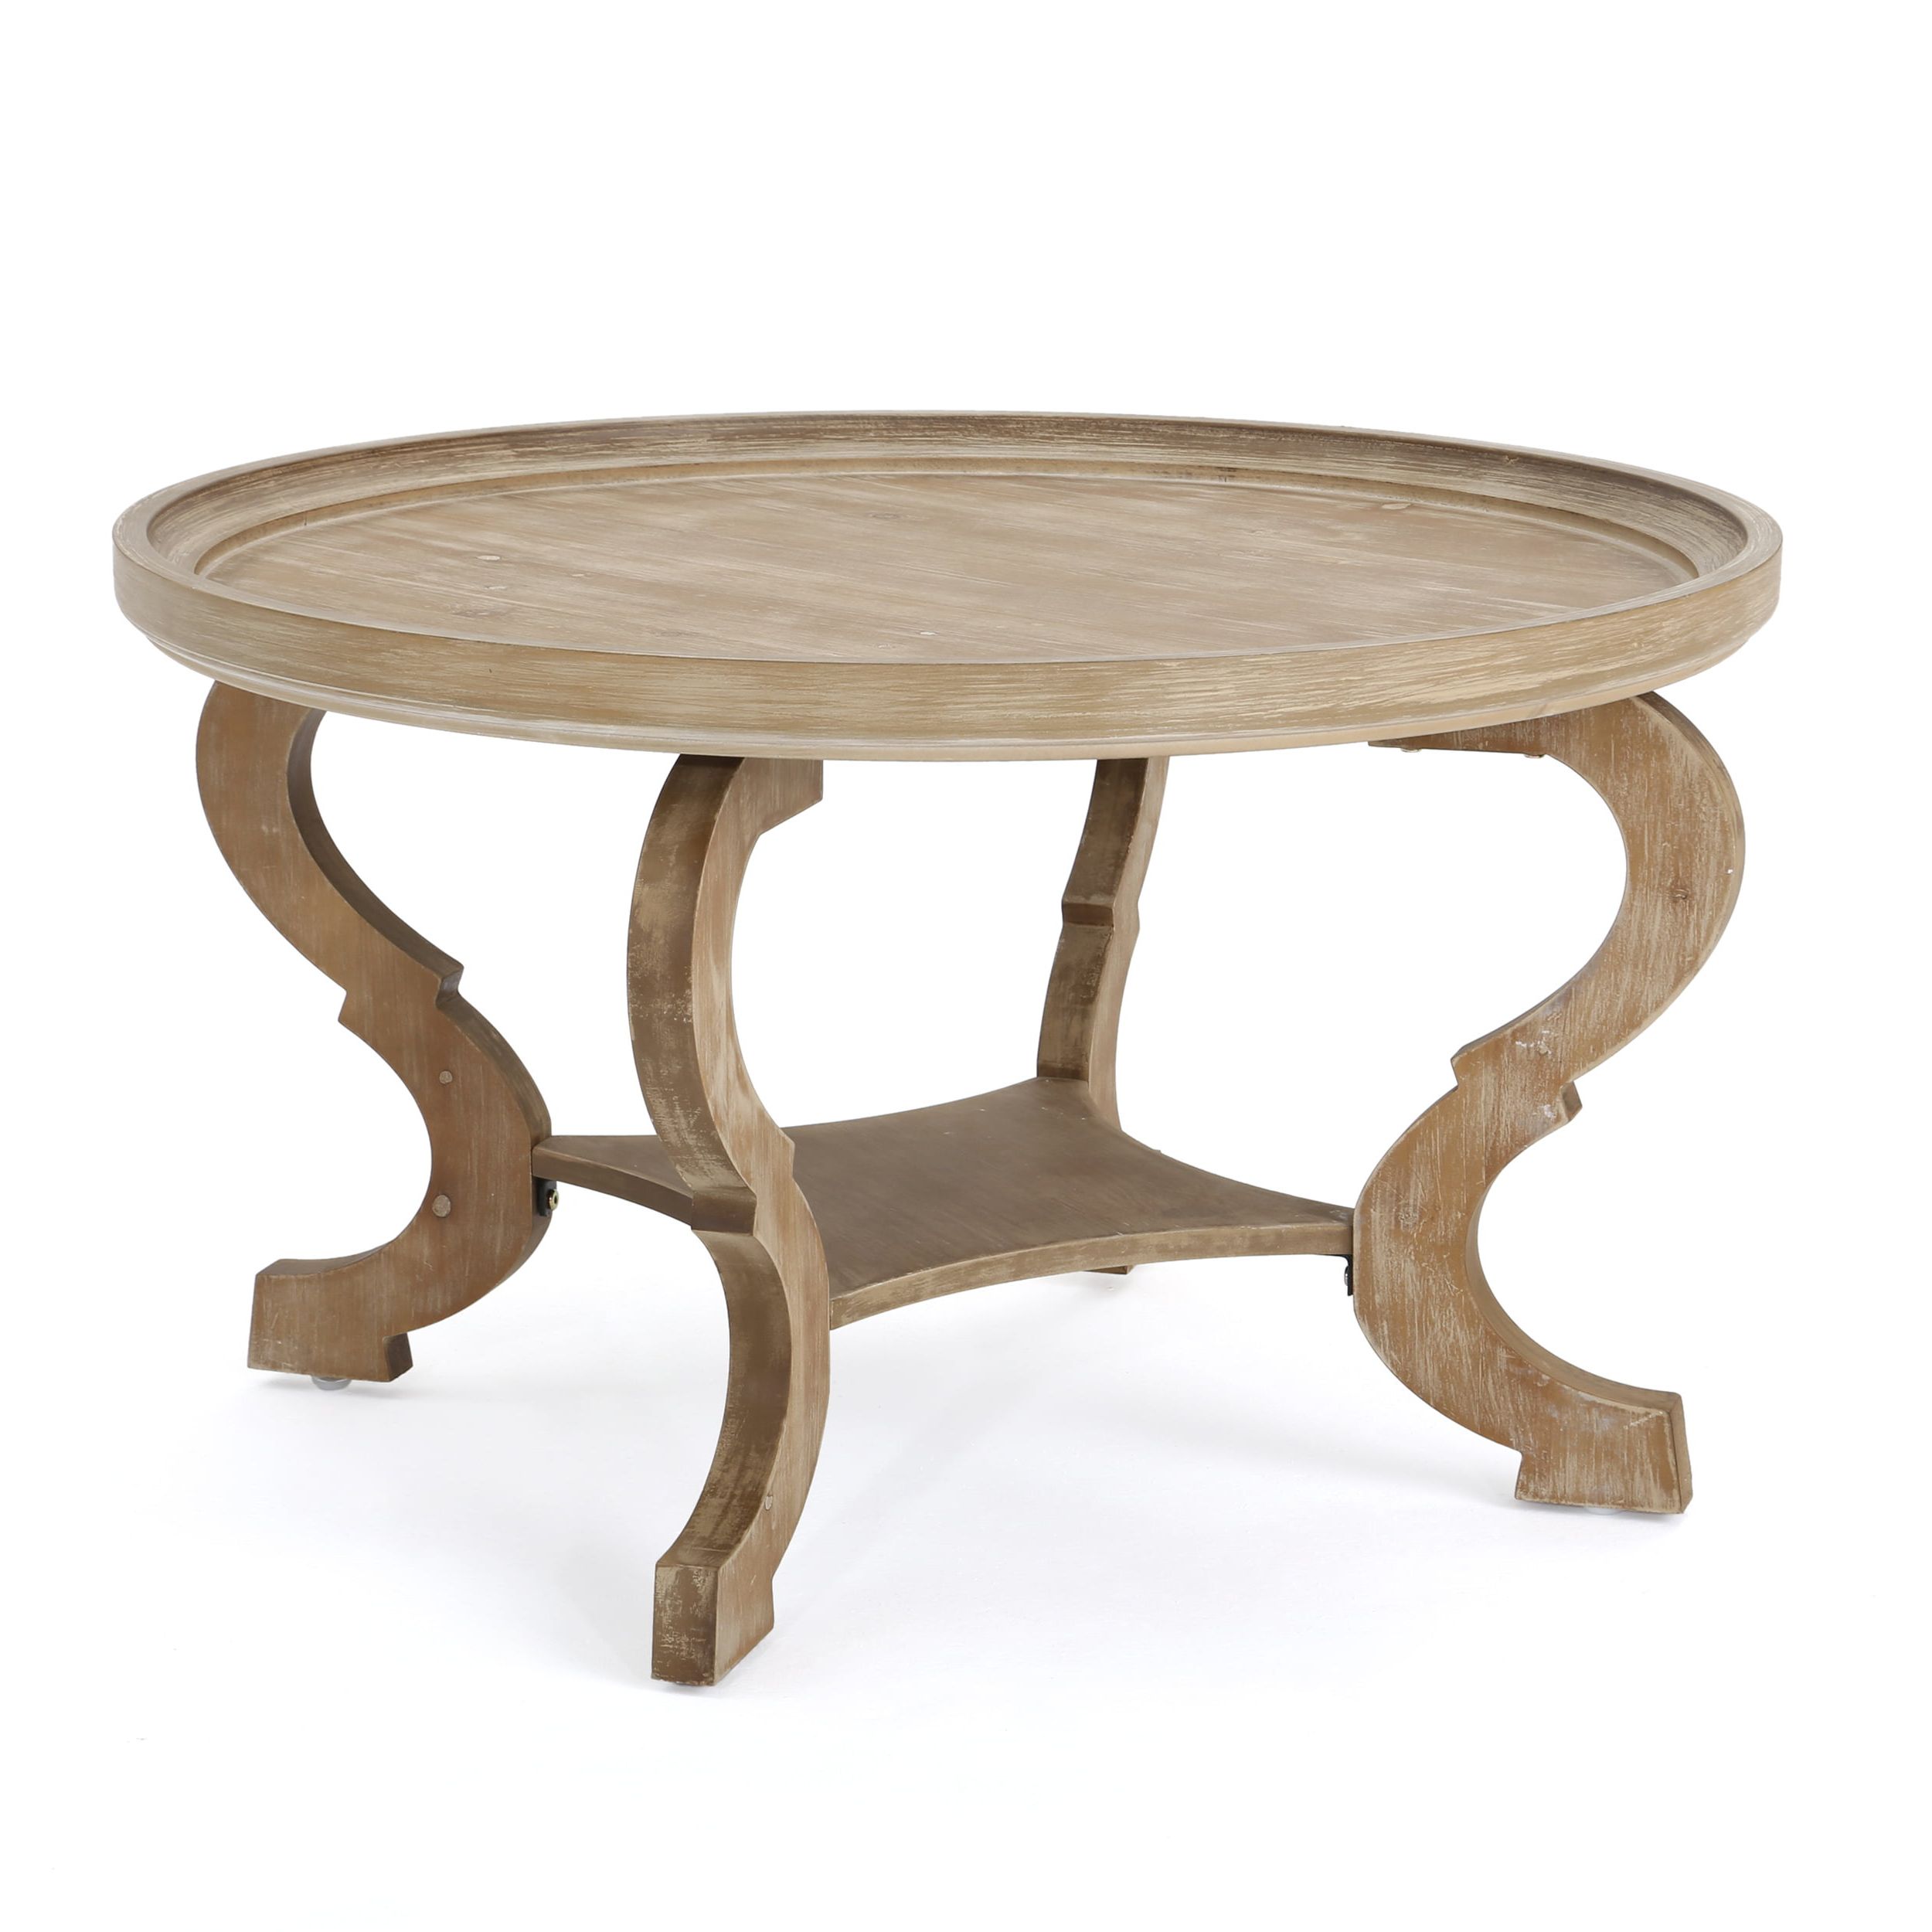 Preferred Faux Wood Coffee Tables Throughout Noble House Shelton Faux Wood Circular Coffee Table, Nature – Walmart (View 4 of 20)